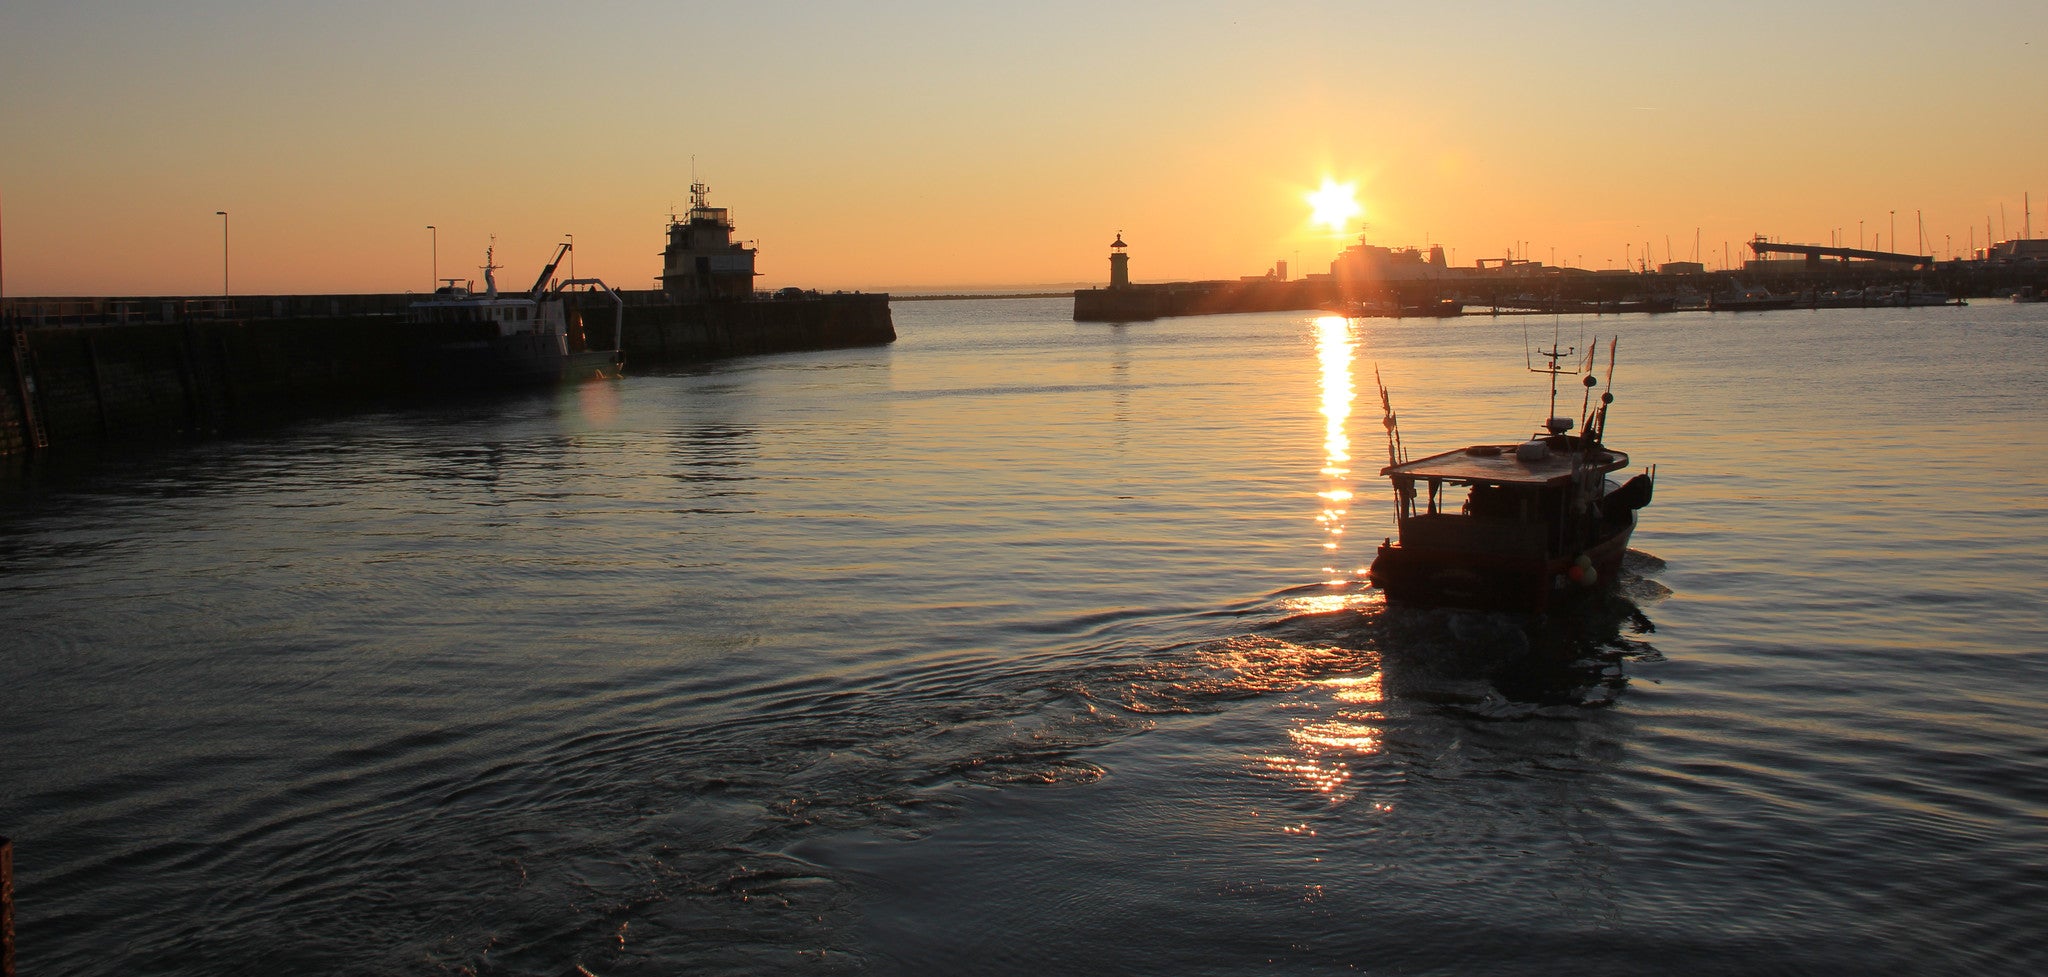 Ramsgate Harbour at Sunset